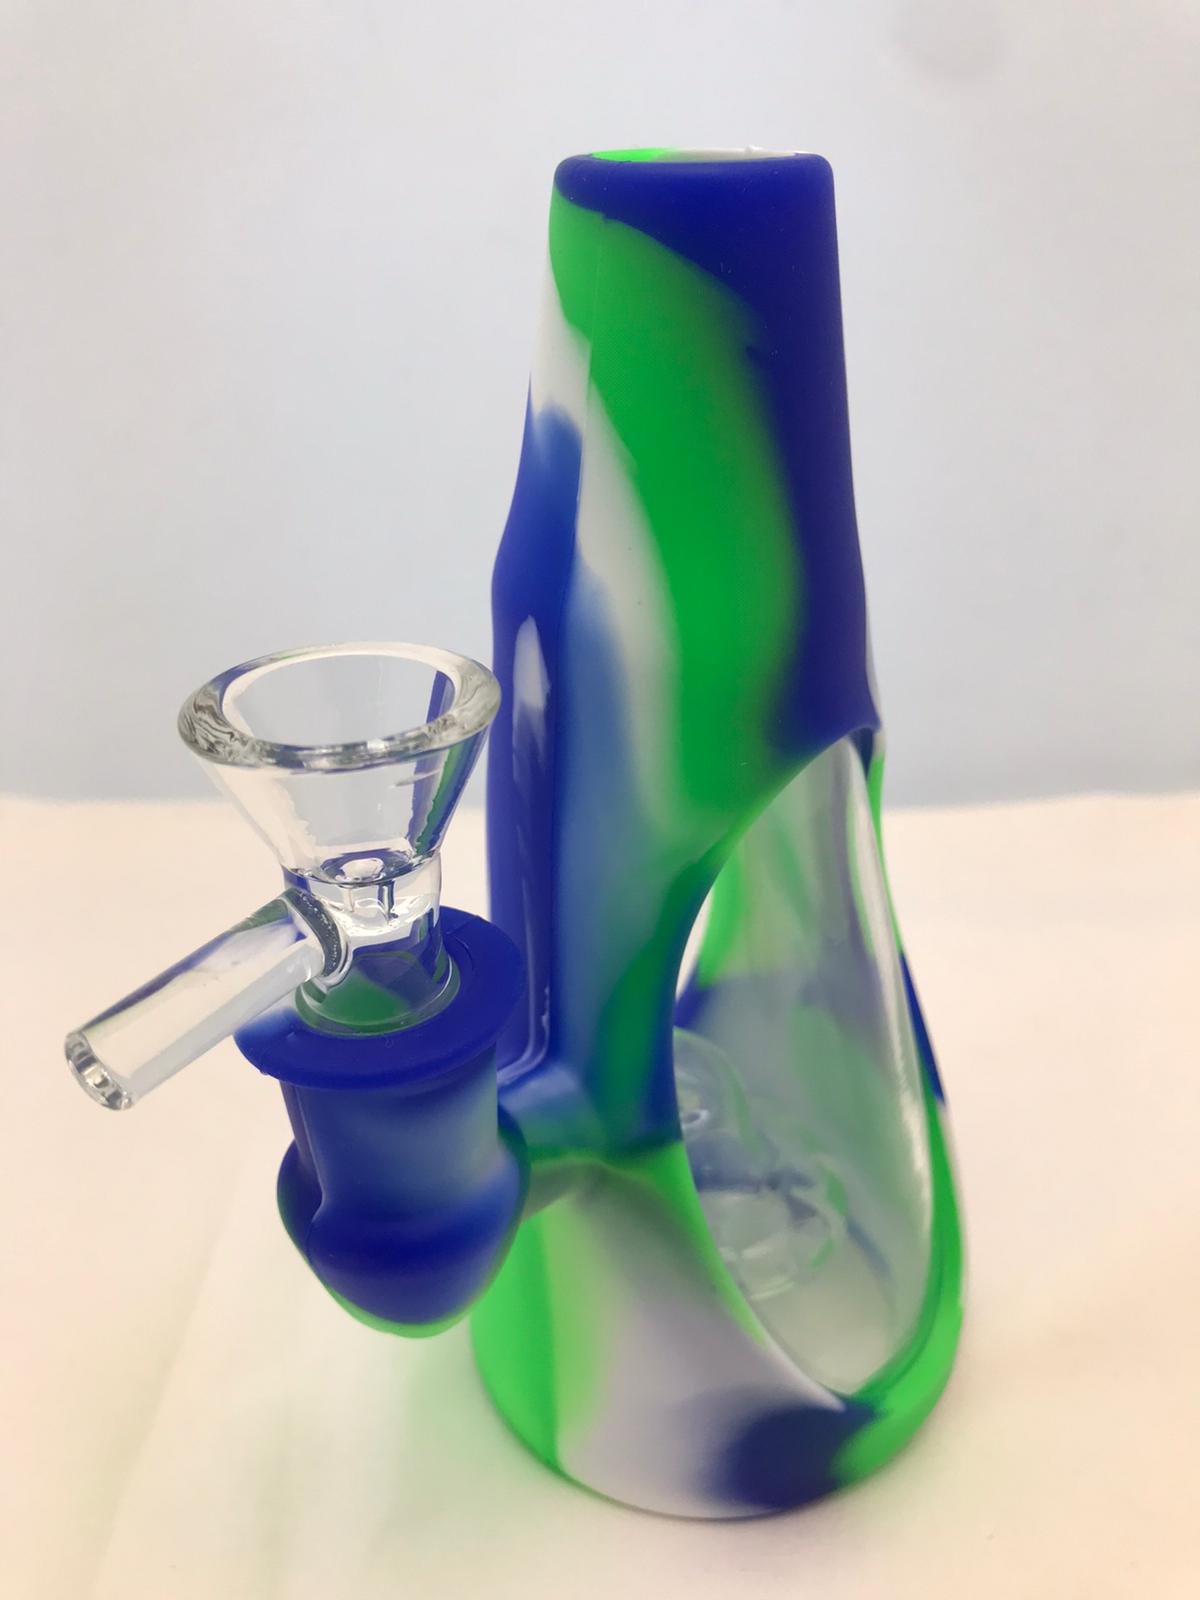 Silicon oval glass bong colors GREEN/BLUE